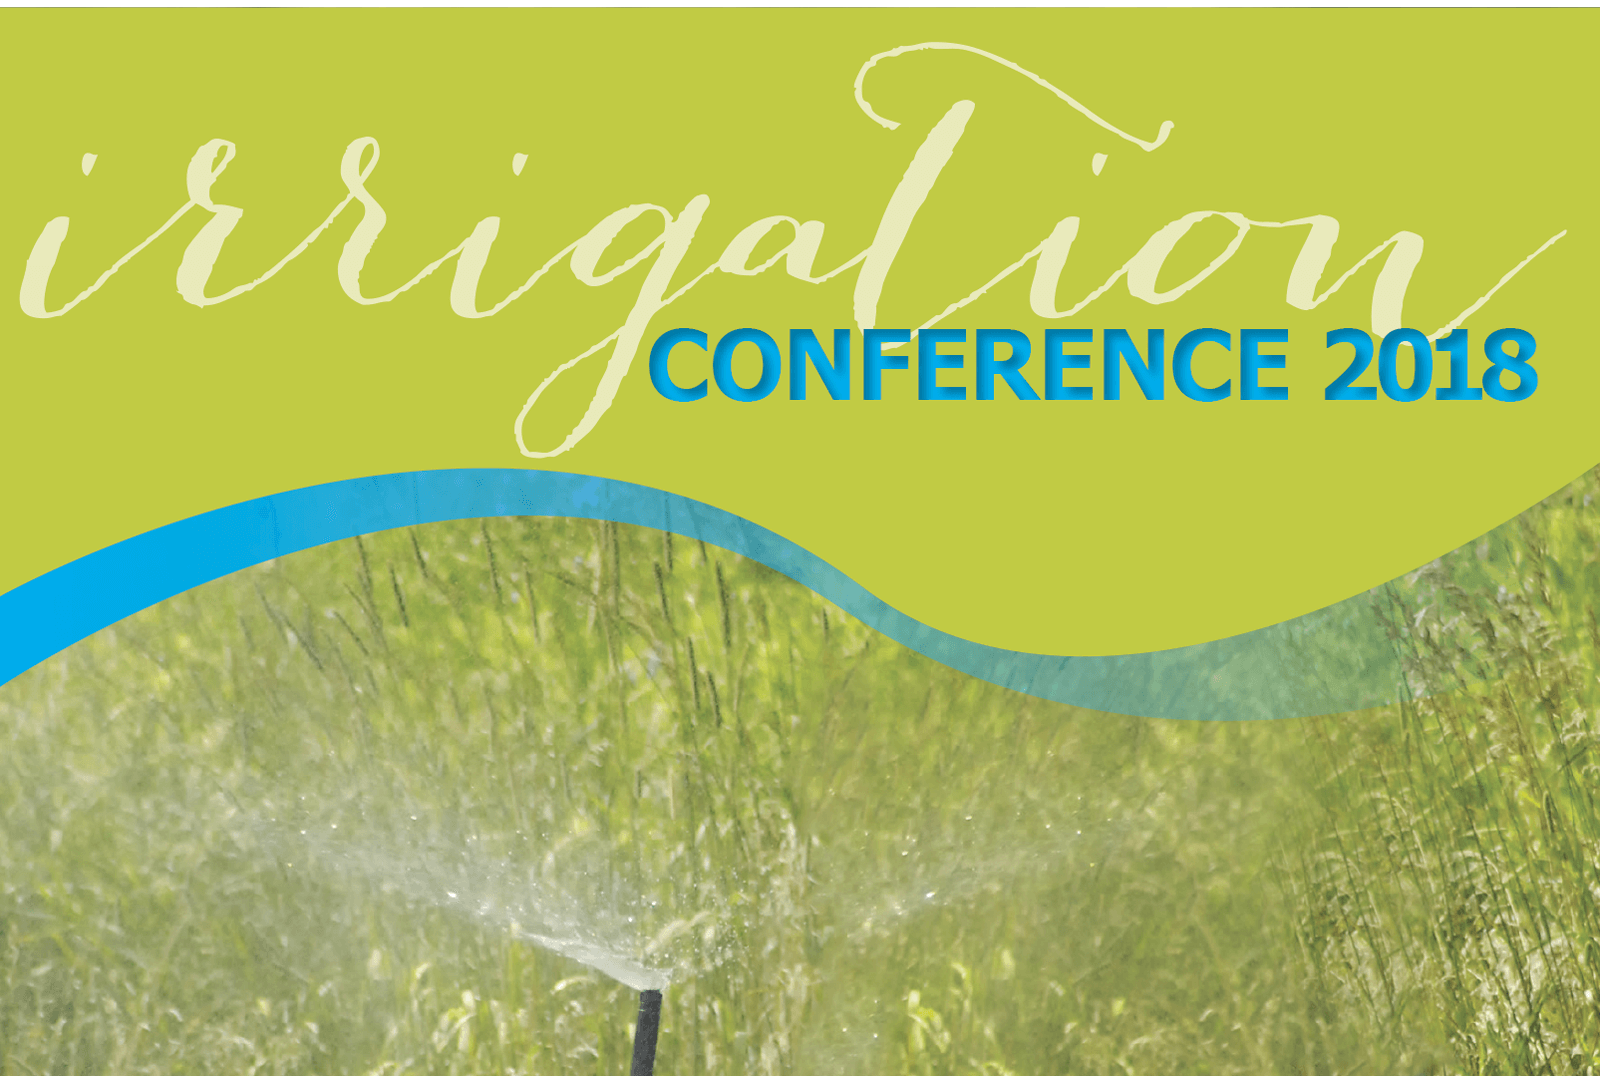 Irrigation Conference 2018